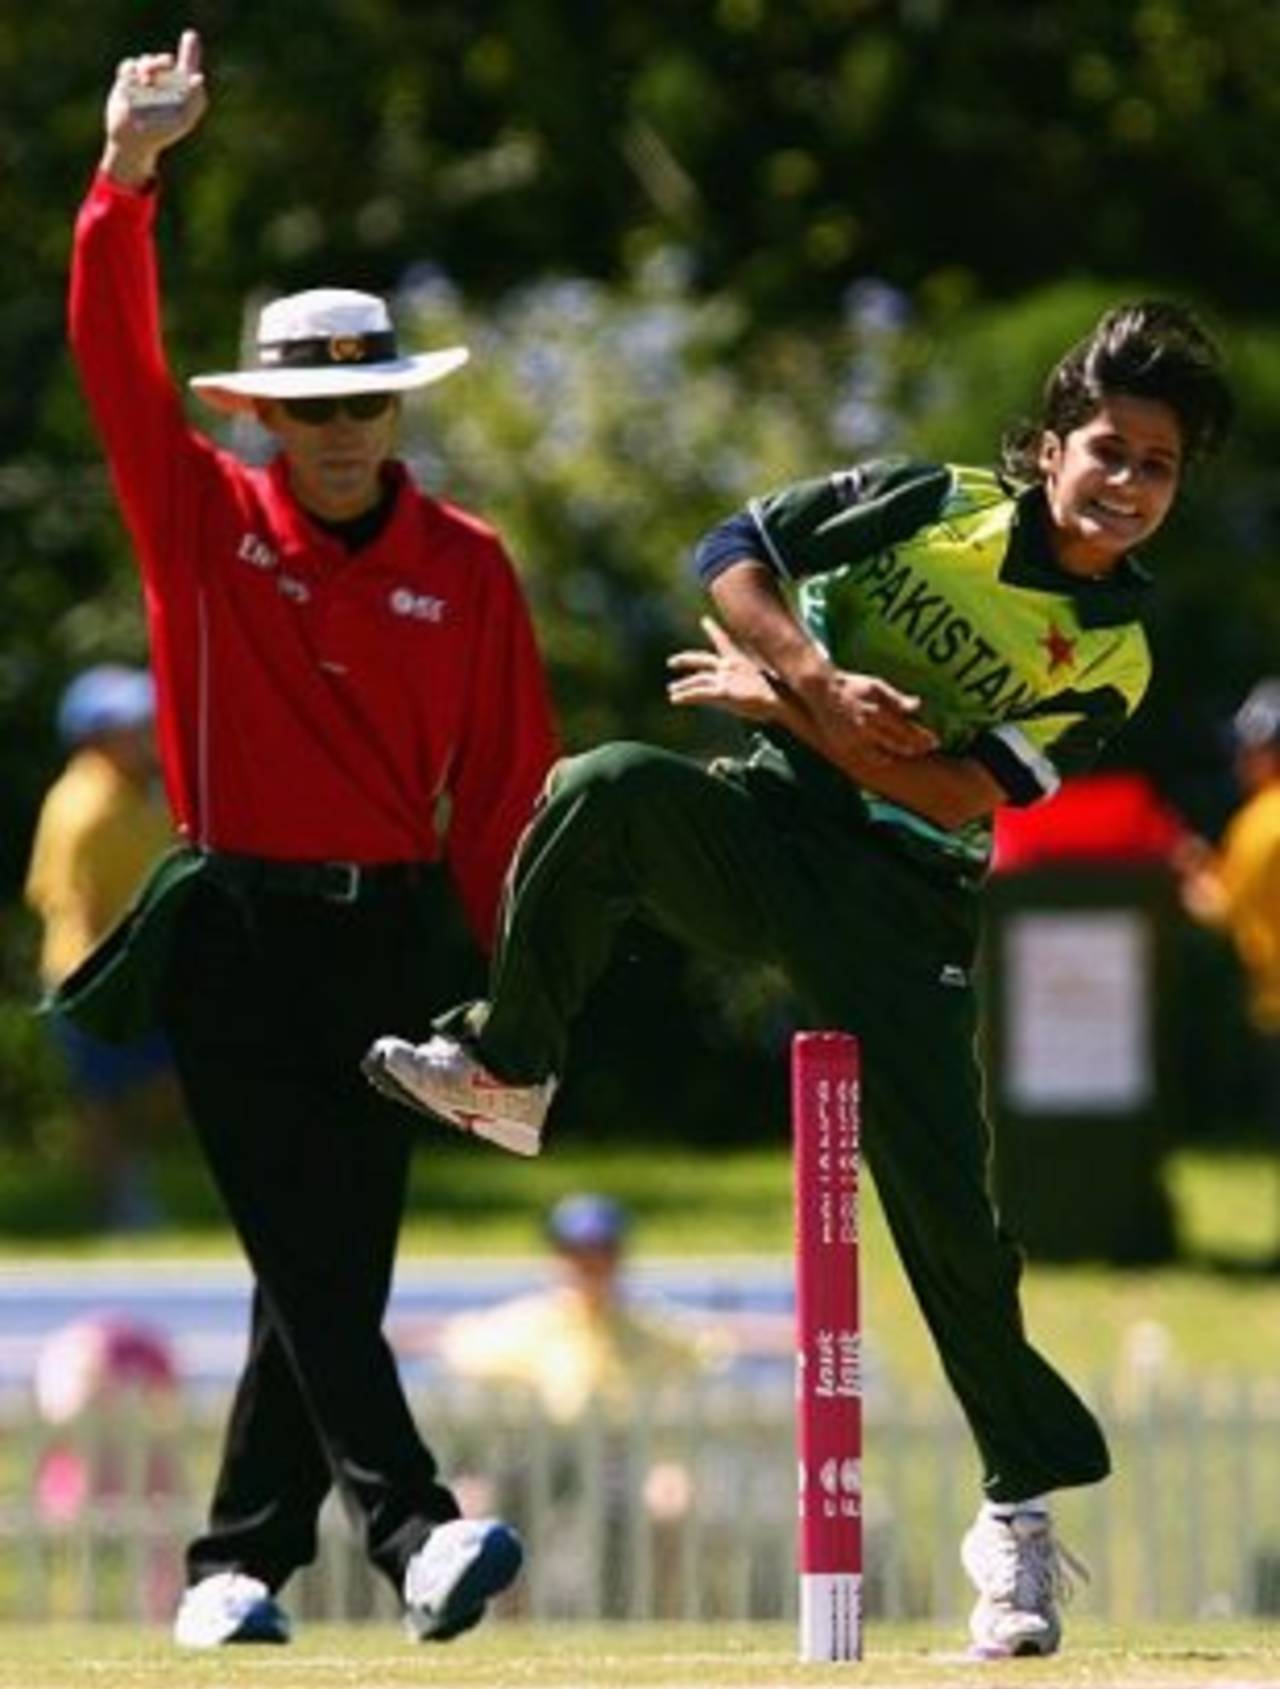 Javeria Khan's elbow extension was found to be well over the tolerance limit of 15 degrees&nbsp;&nbsp;&bull;&nbsp;&nbsp;Getty Images